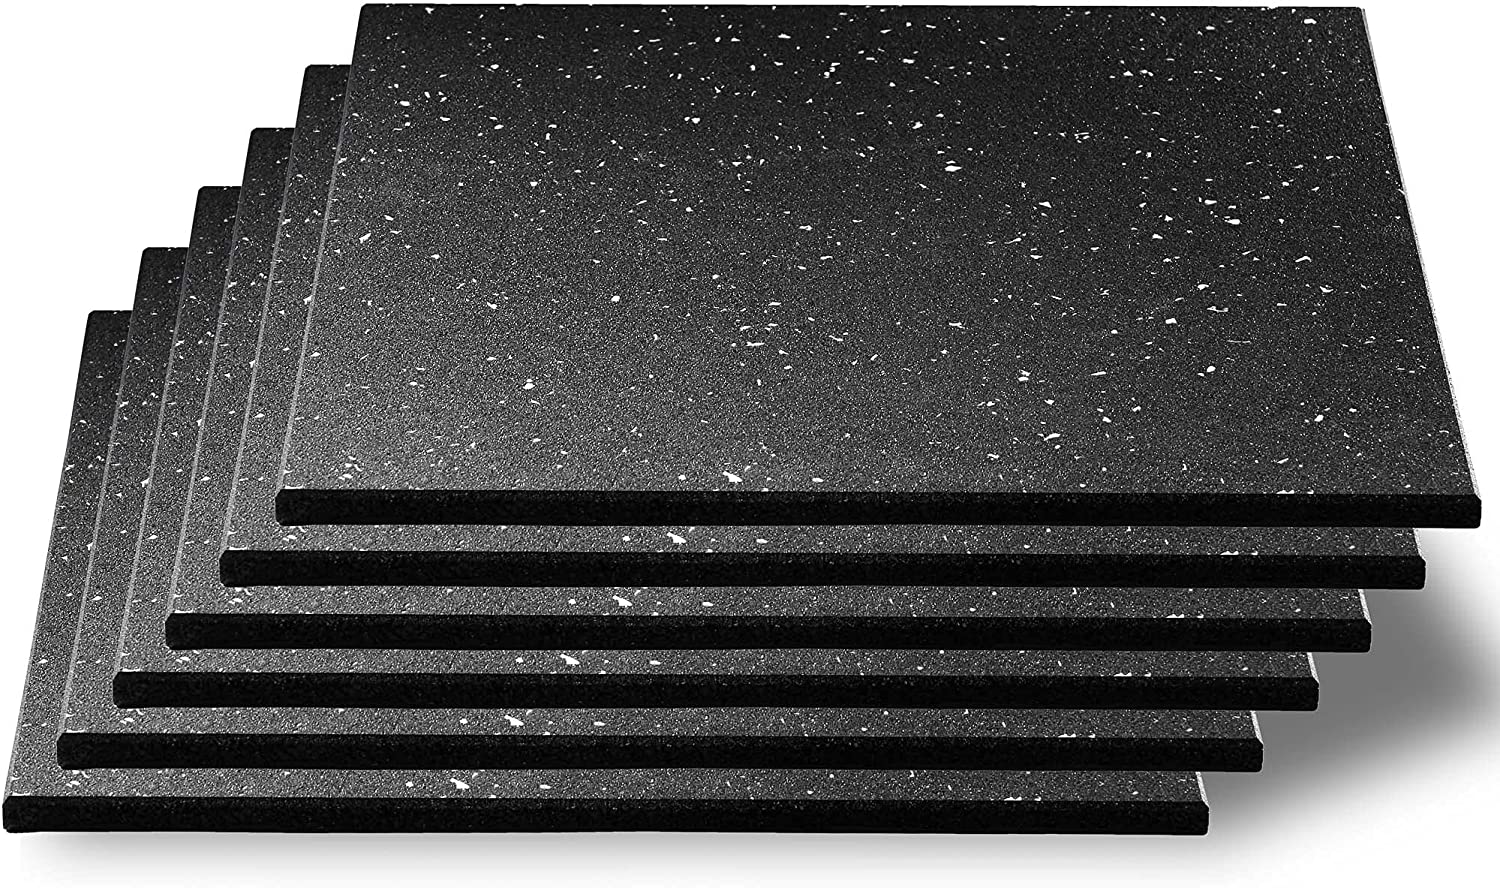 CyclingDeal 5/8" Thick High-Density Gym Floor Mats Tiles - 6 Pack 19.67”x19.67” Rubber Exercise Workout Equipment Ground Mat - Noise Shock Absorbing Surface Protection - for Home Gym Garage Playground